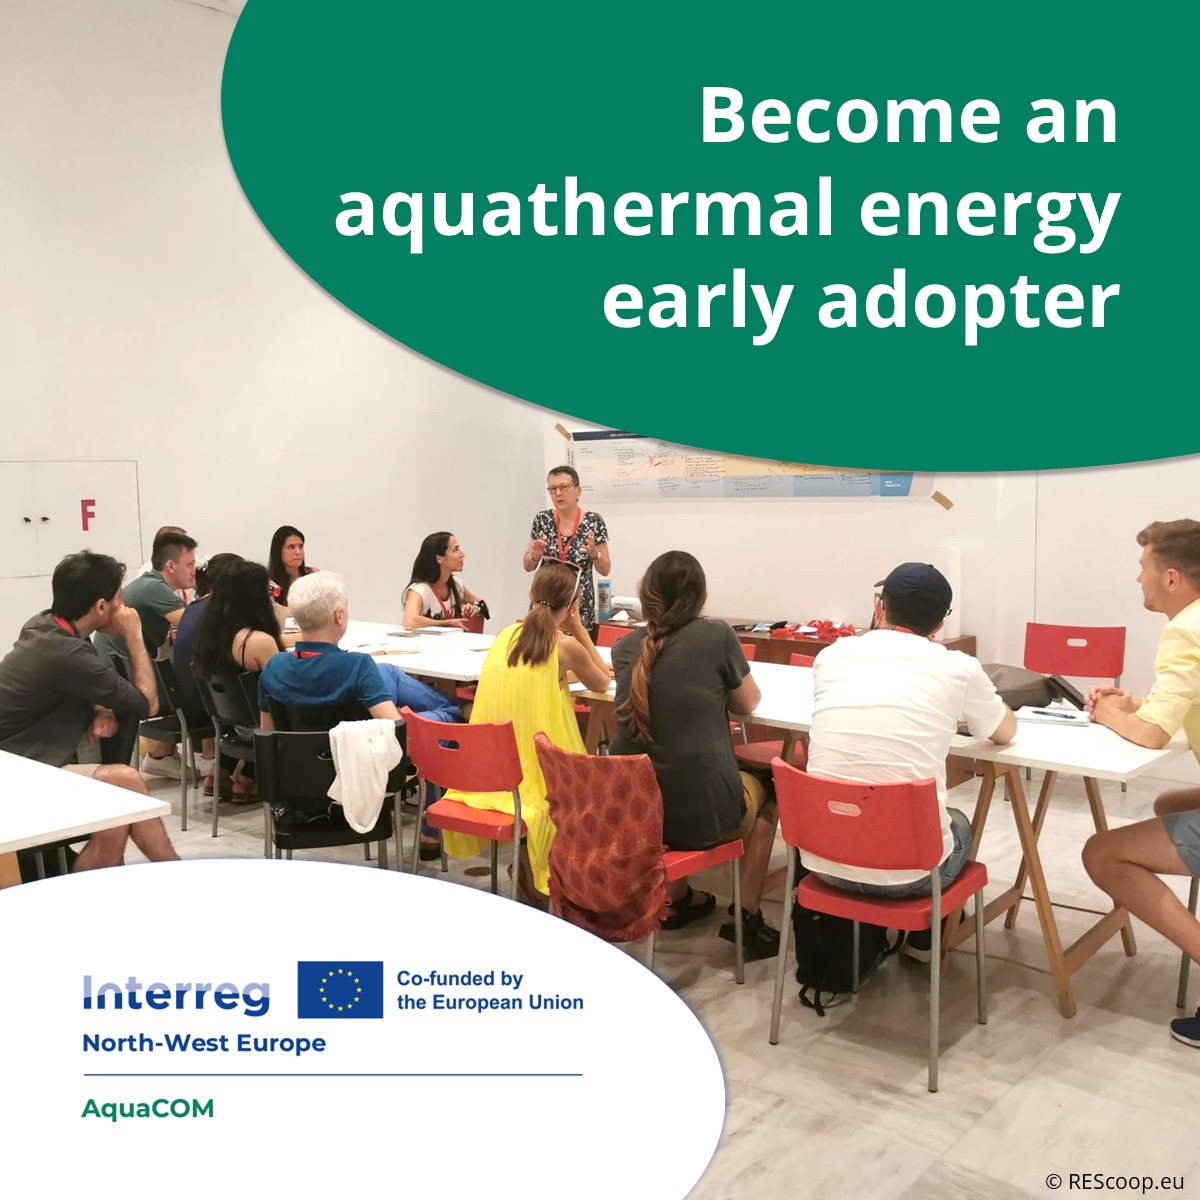 💧 #AquathermalEnergy has a largely untapped potential. Have you considered using it for community heat generation? 💡 Become an #AquaCOM Early Adopter with your #EnergyCommunity and receive support to develop your own aquathermal energy project! 🔗 bit.ly/3Wb6ksn